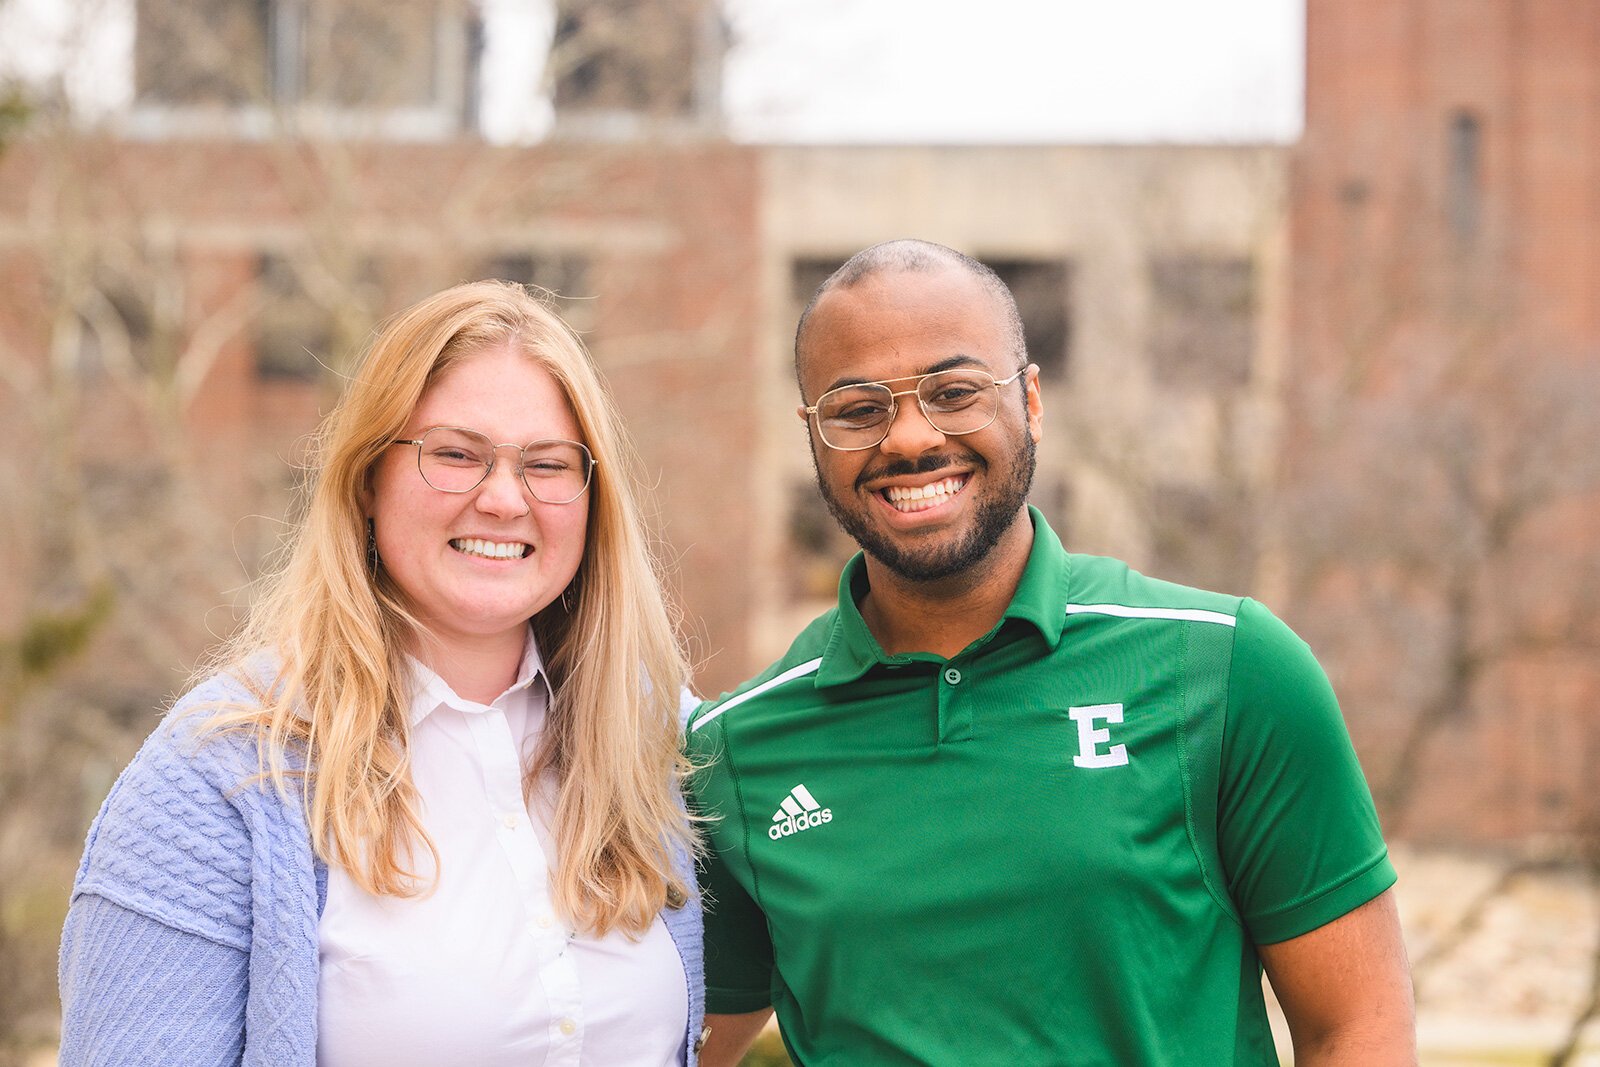 Engage @ EMU Voter Coalition members Maggie Whittemore and Lamarr Mitchell.